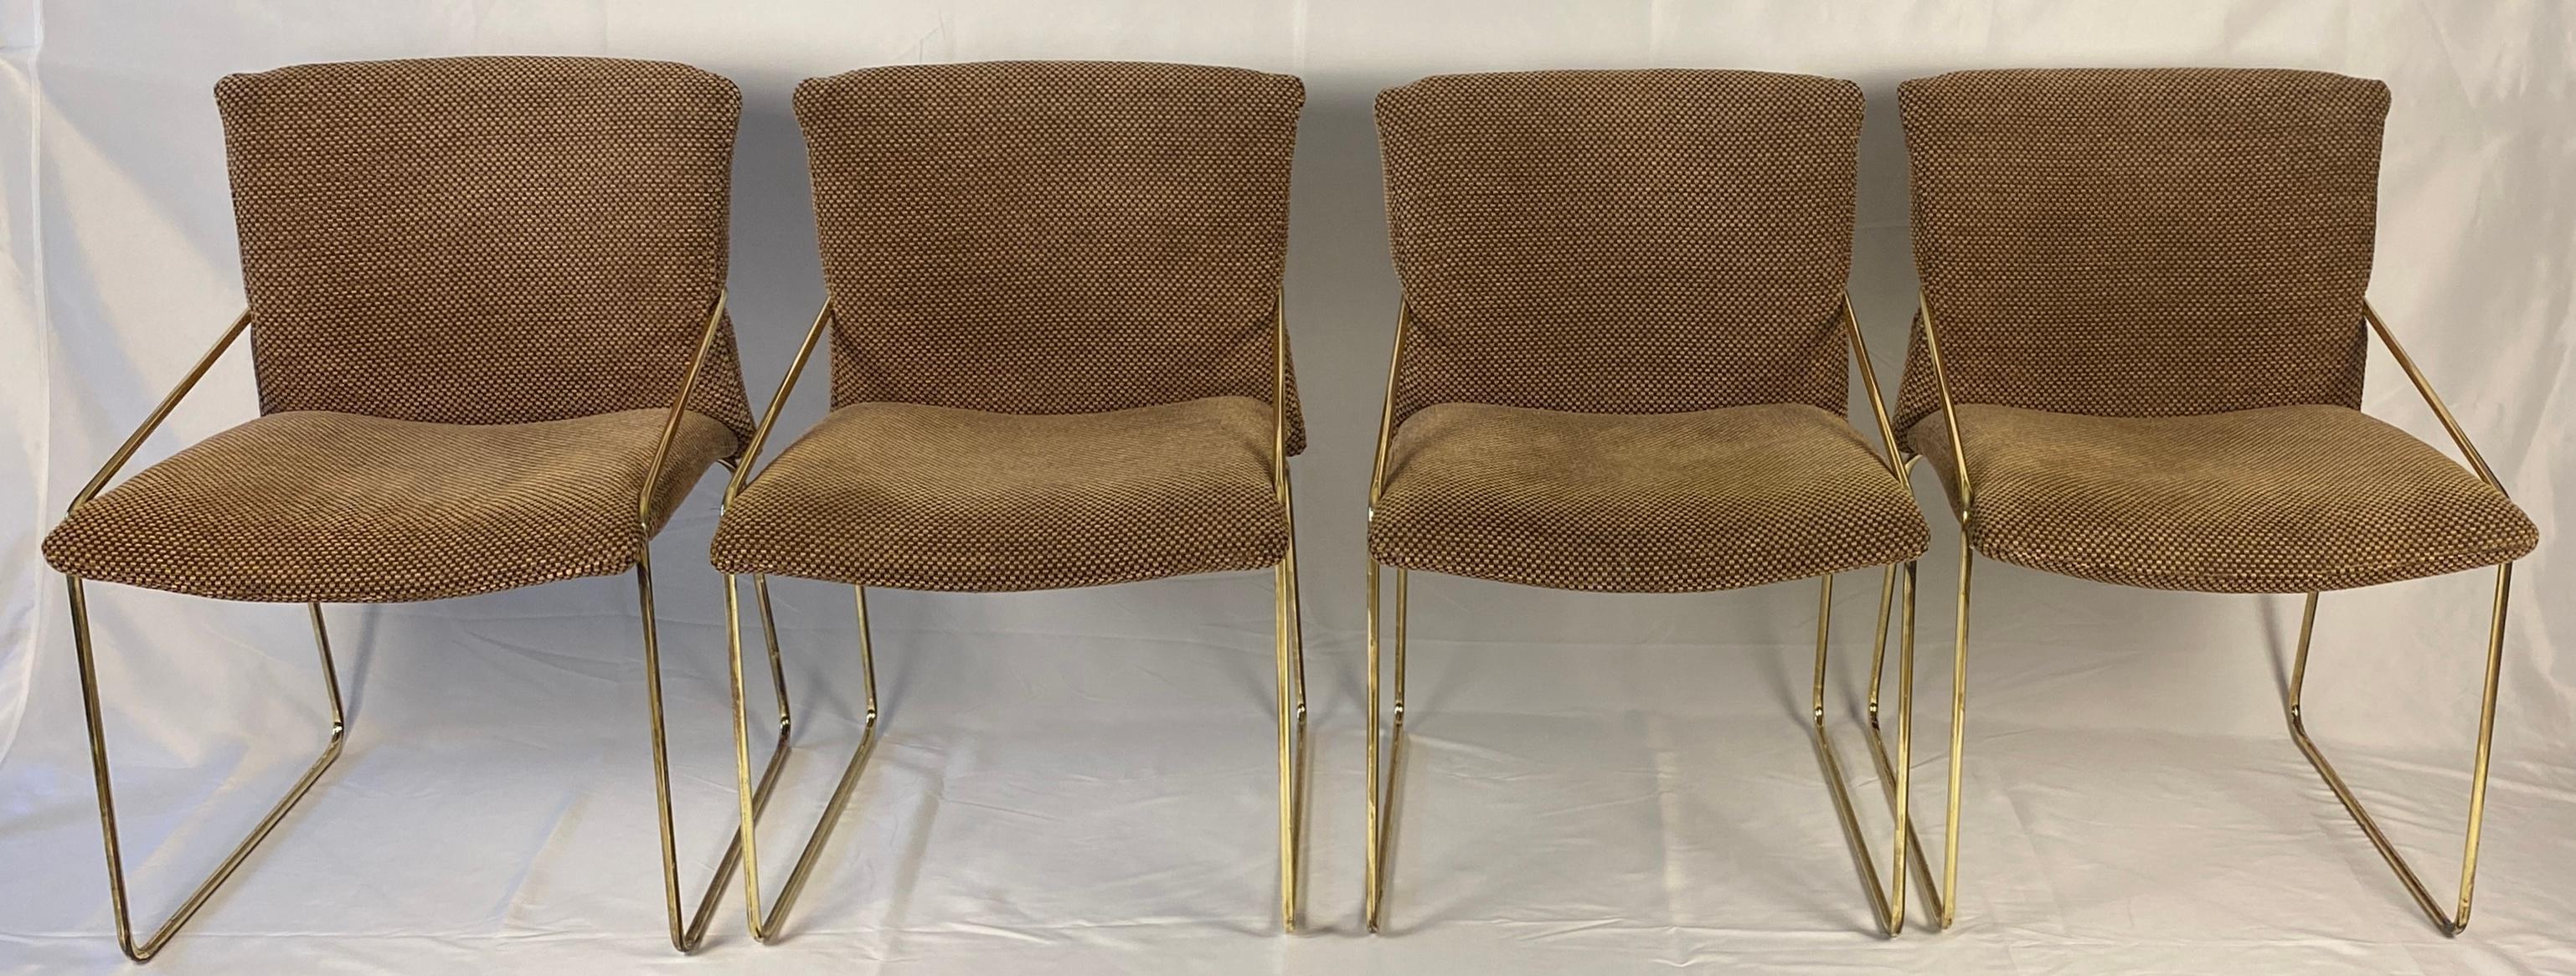 Set of 4 Brass and Upholstered Side Chairs in the Style of Milo Baughman 1